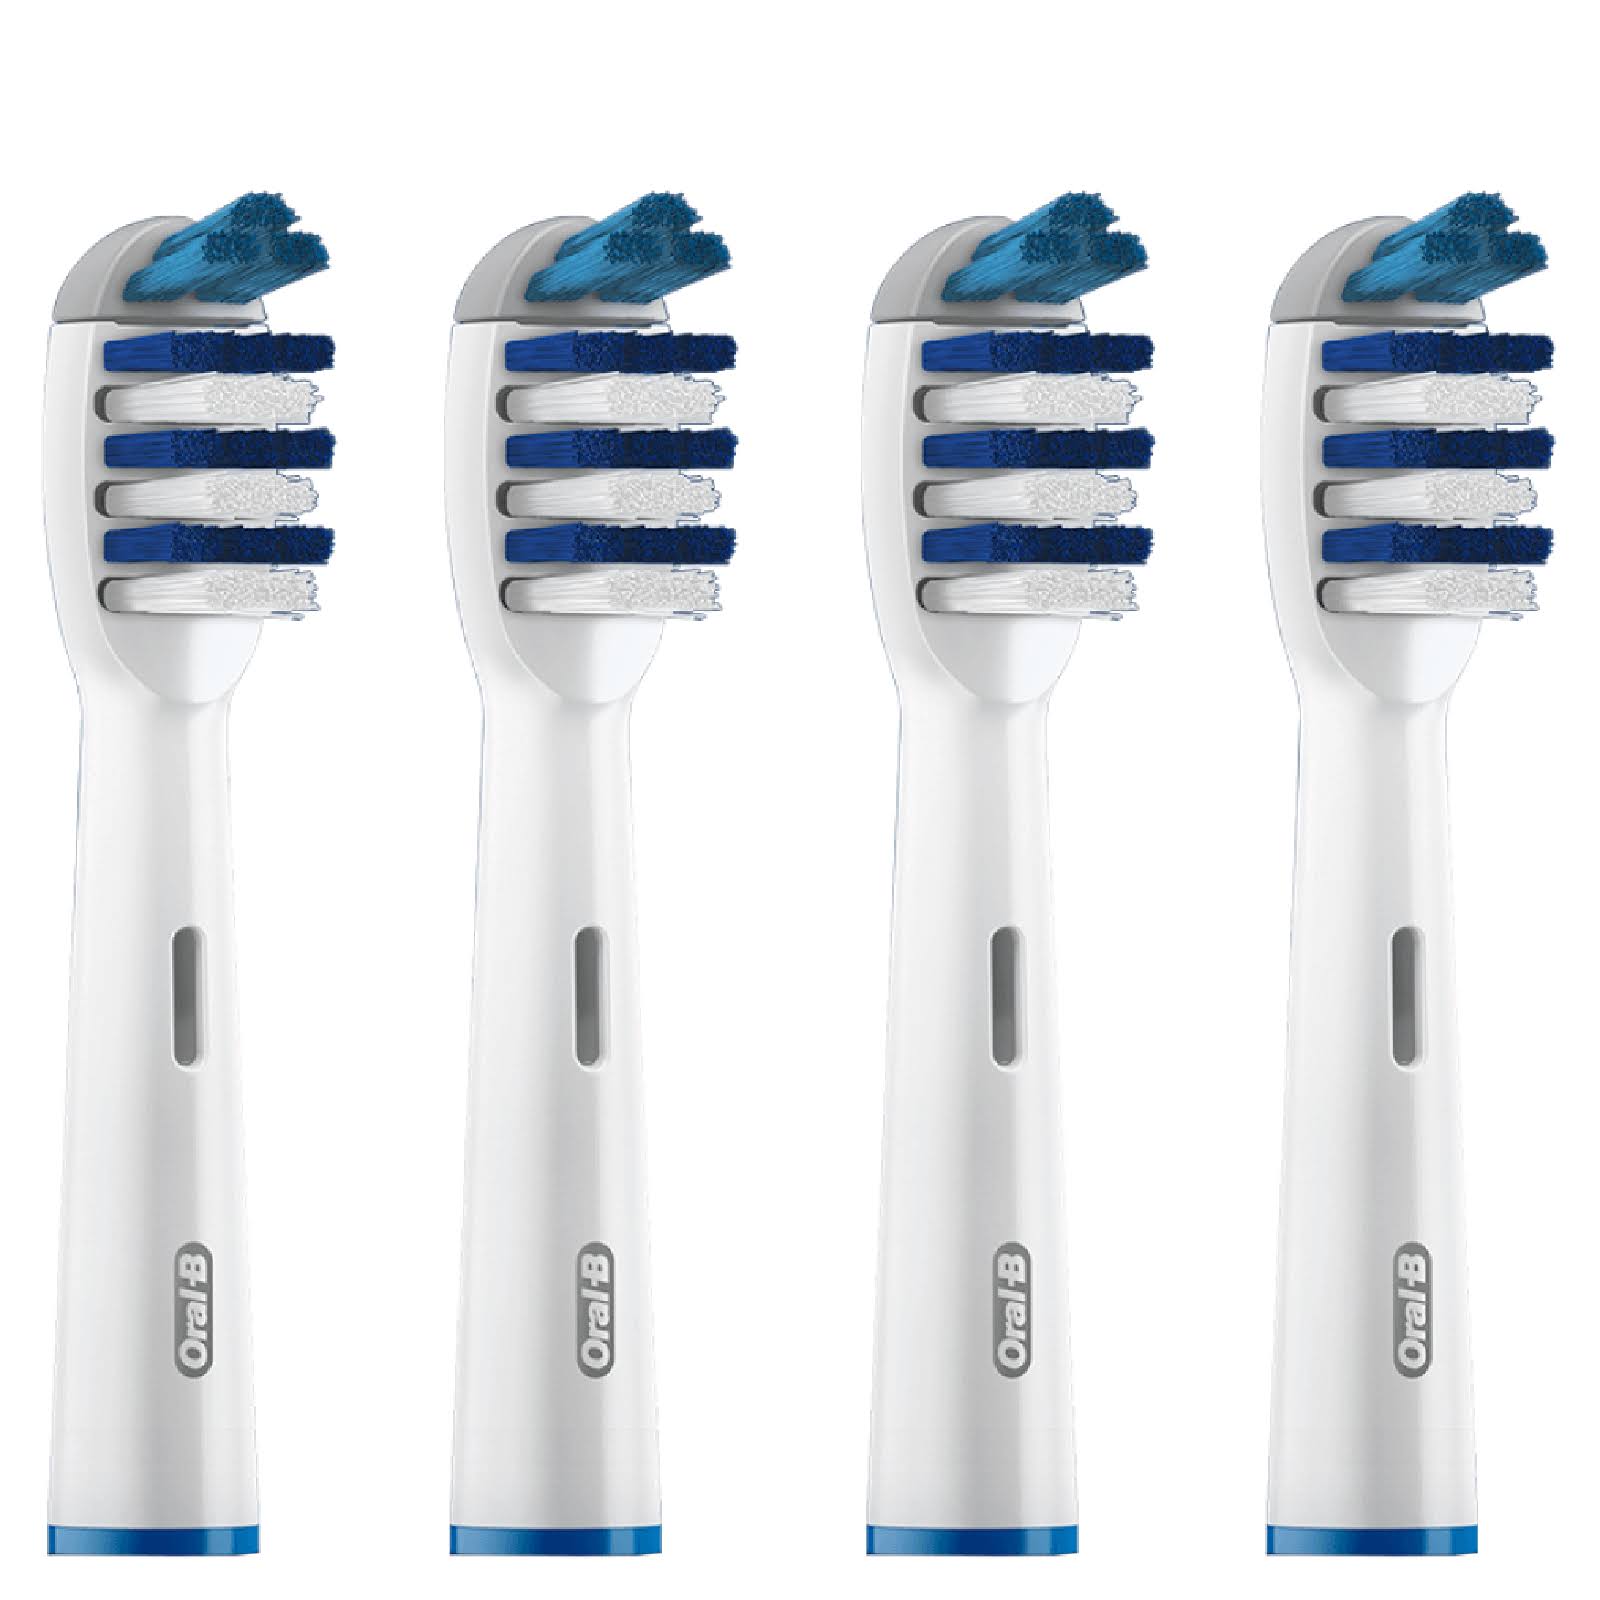 Oral-B Trizone Electric Toothbrush Replacement Heads - 4 Pack